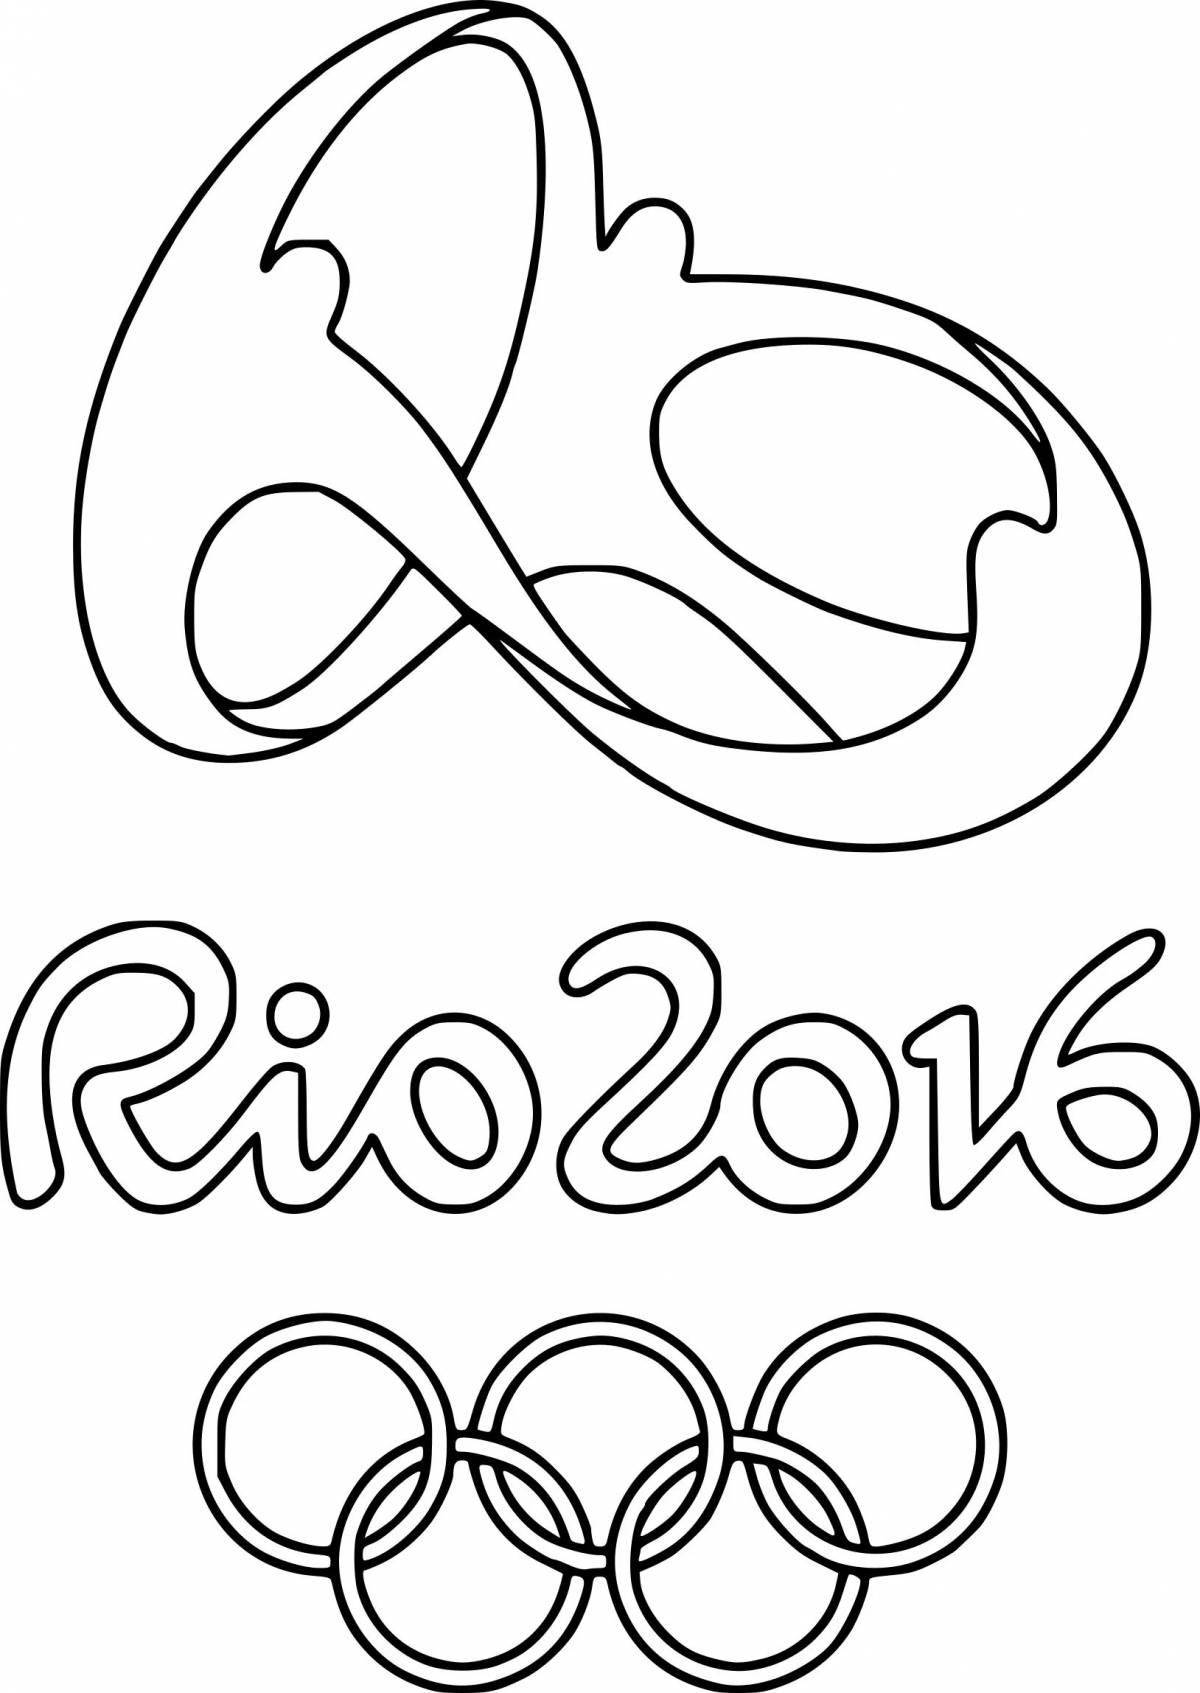 Fun coloring book olympic games for kids